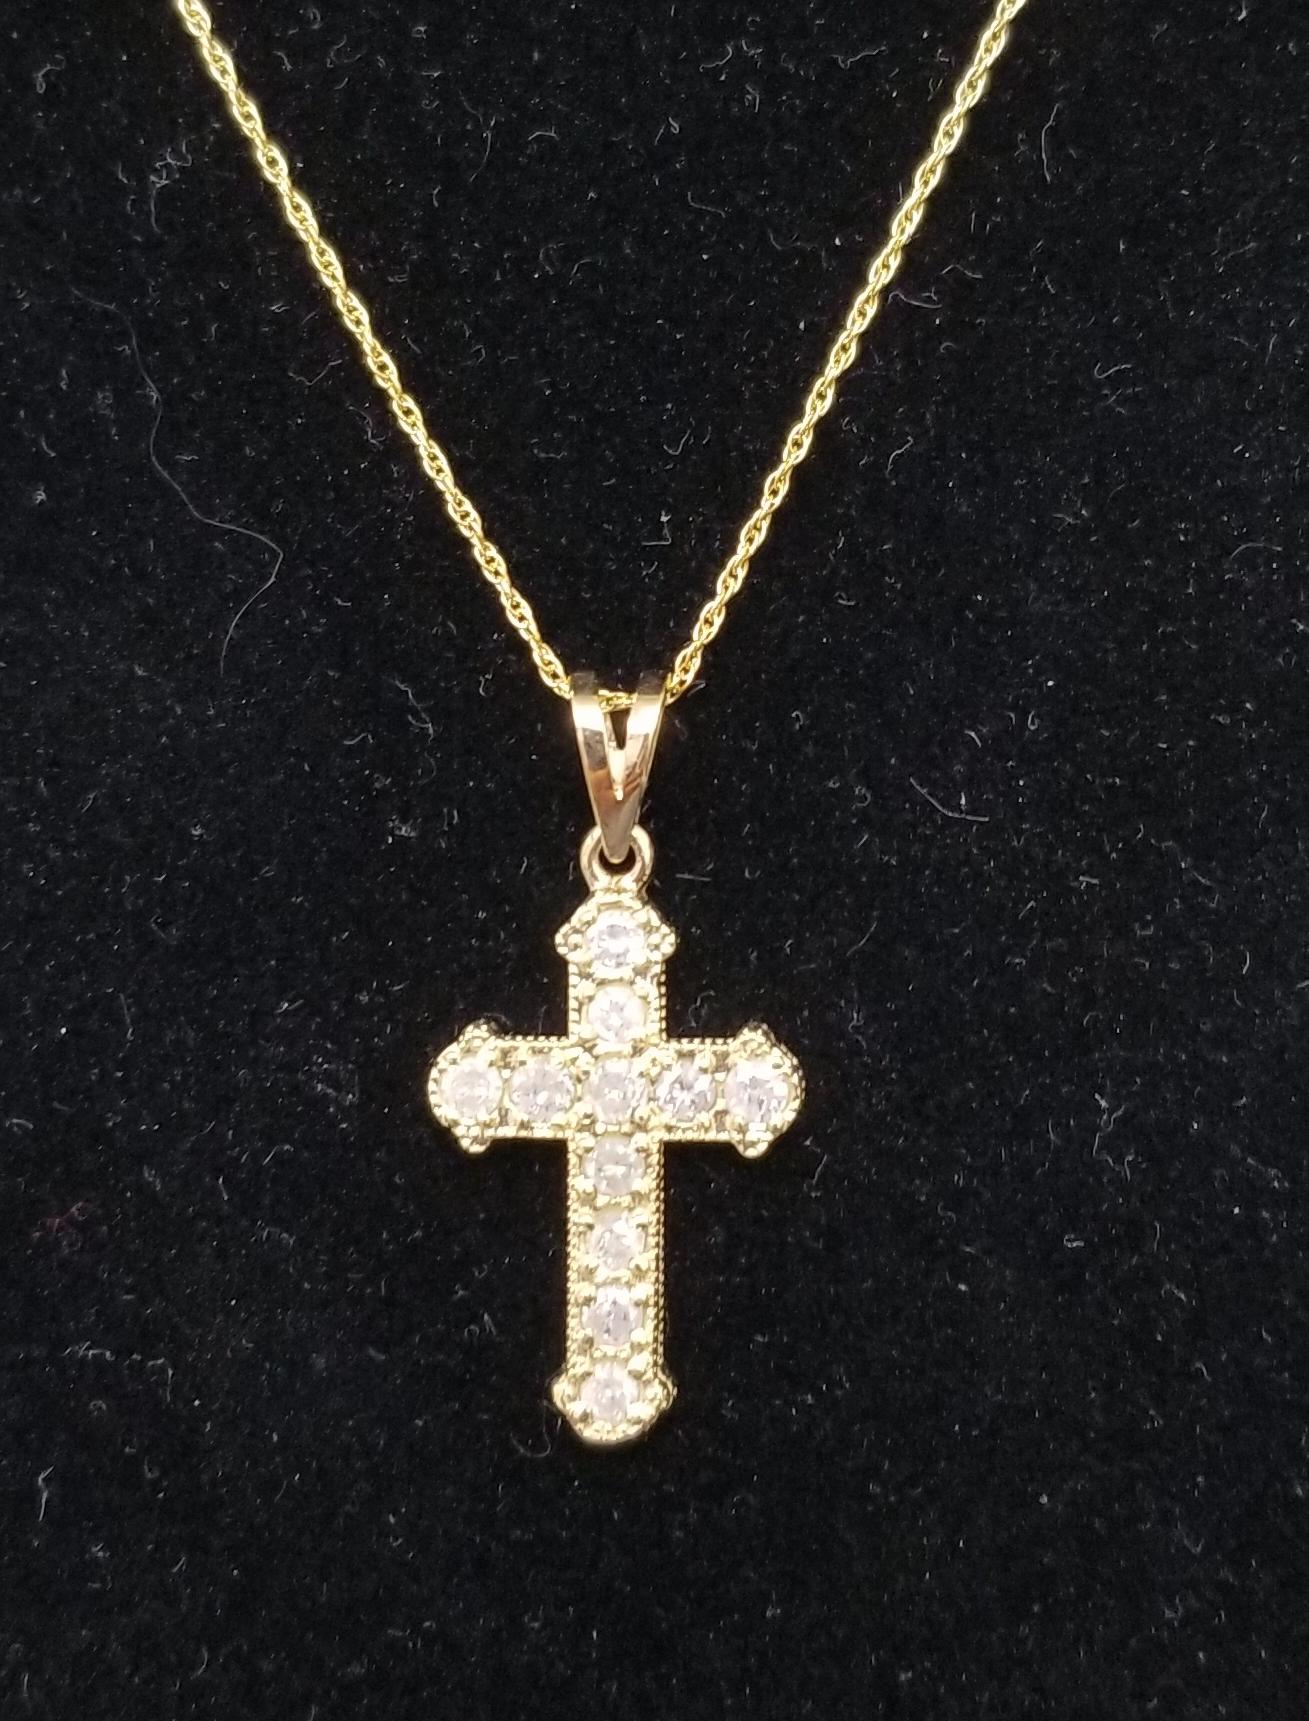 14k yellow gold diamond cross containing 11 round full cut diamonds fair quality weighing .78pts. on a 16 inch link chain.